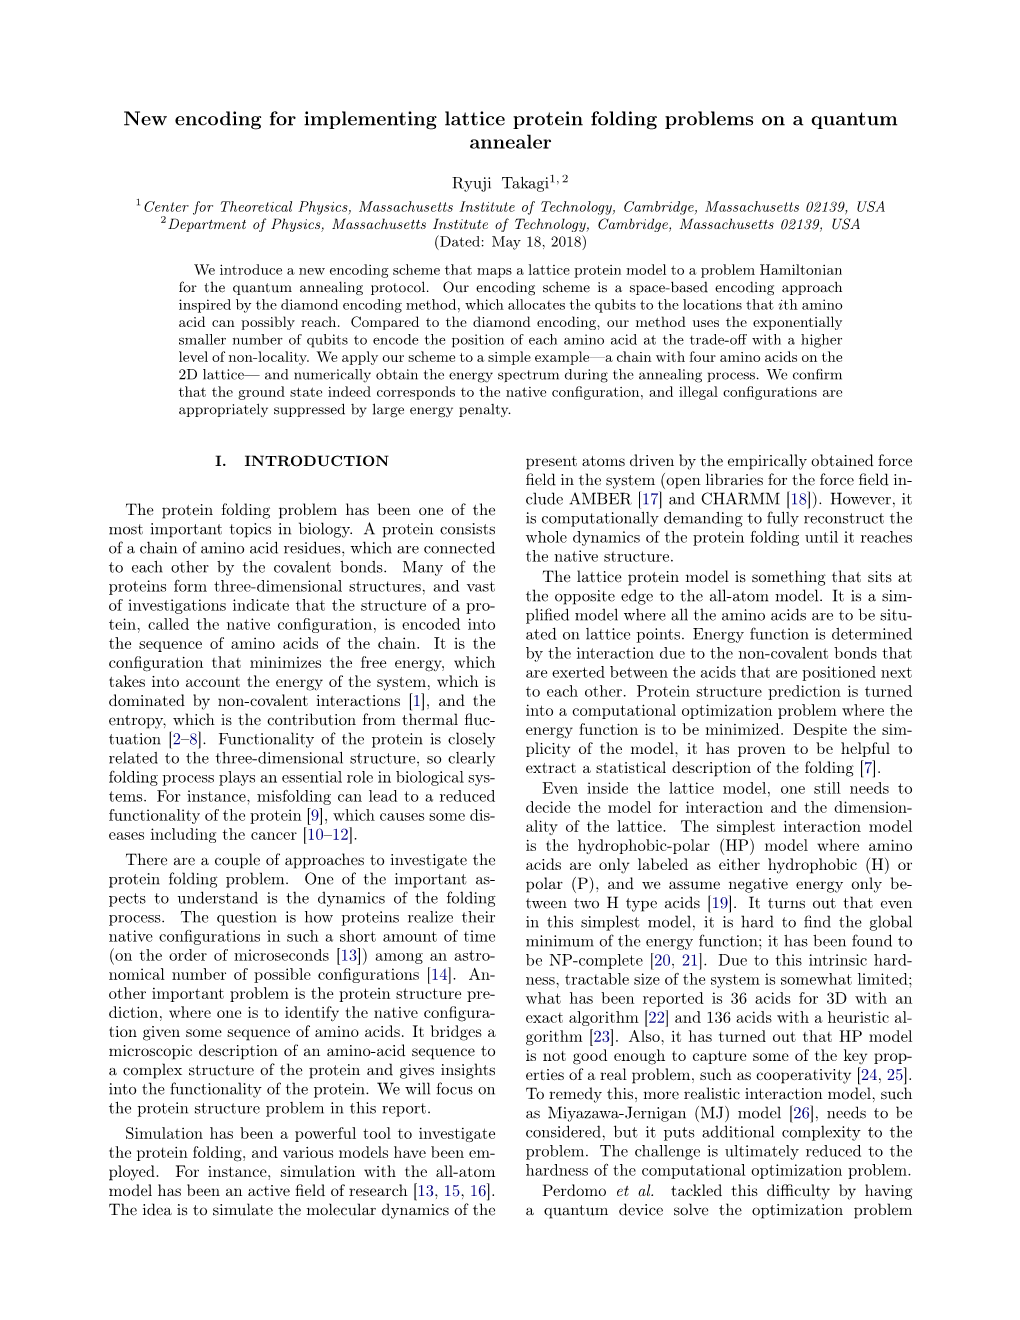 New Encoding for Implementing Lattice Protein Folding Problems on a Quantum Annealer